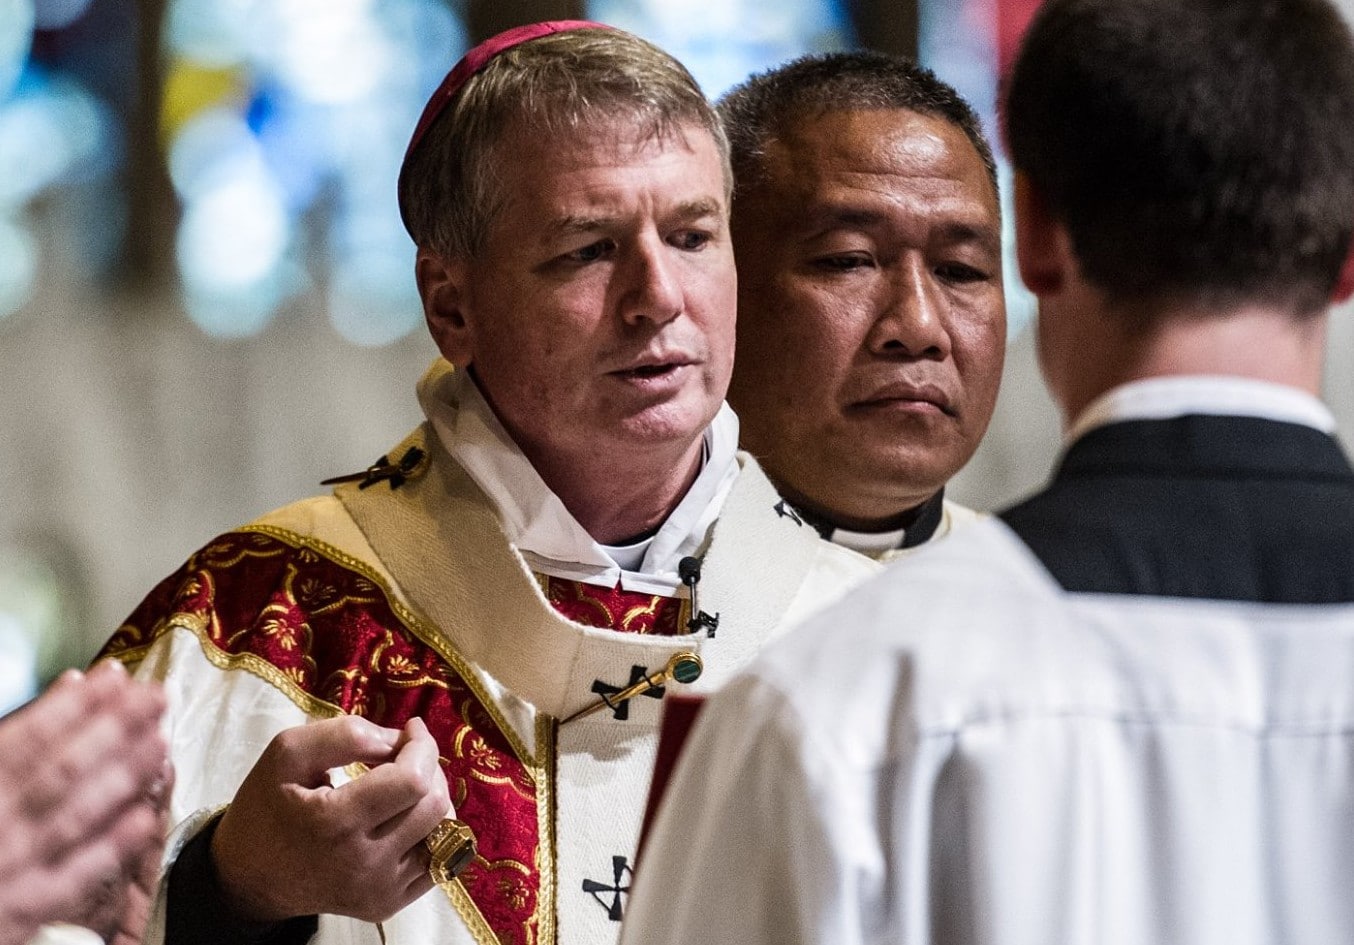 Archbishop Anthony Fisher OP pictured at the Chrism Mass at St Mary's Cathedral on 24 March. Photo: Giovanni Portelli